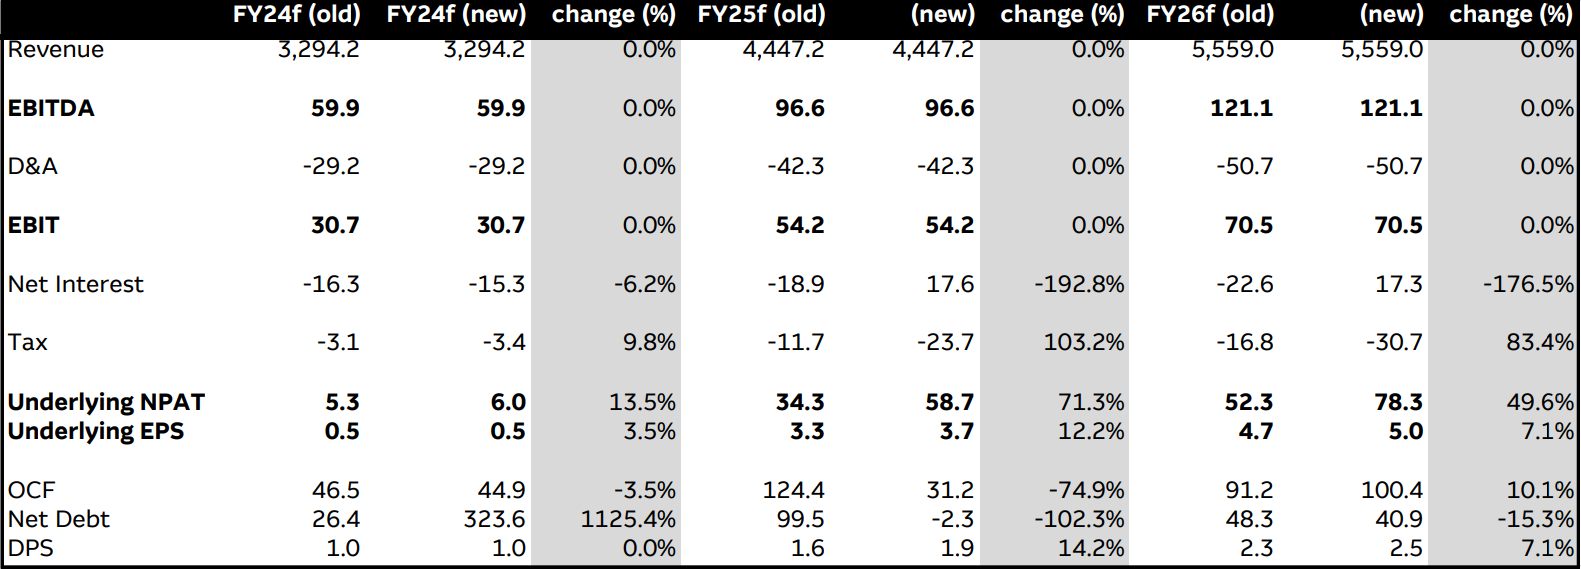 Summary of earnings changes. Source: Company data, Macquarie Research, December 2023